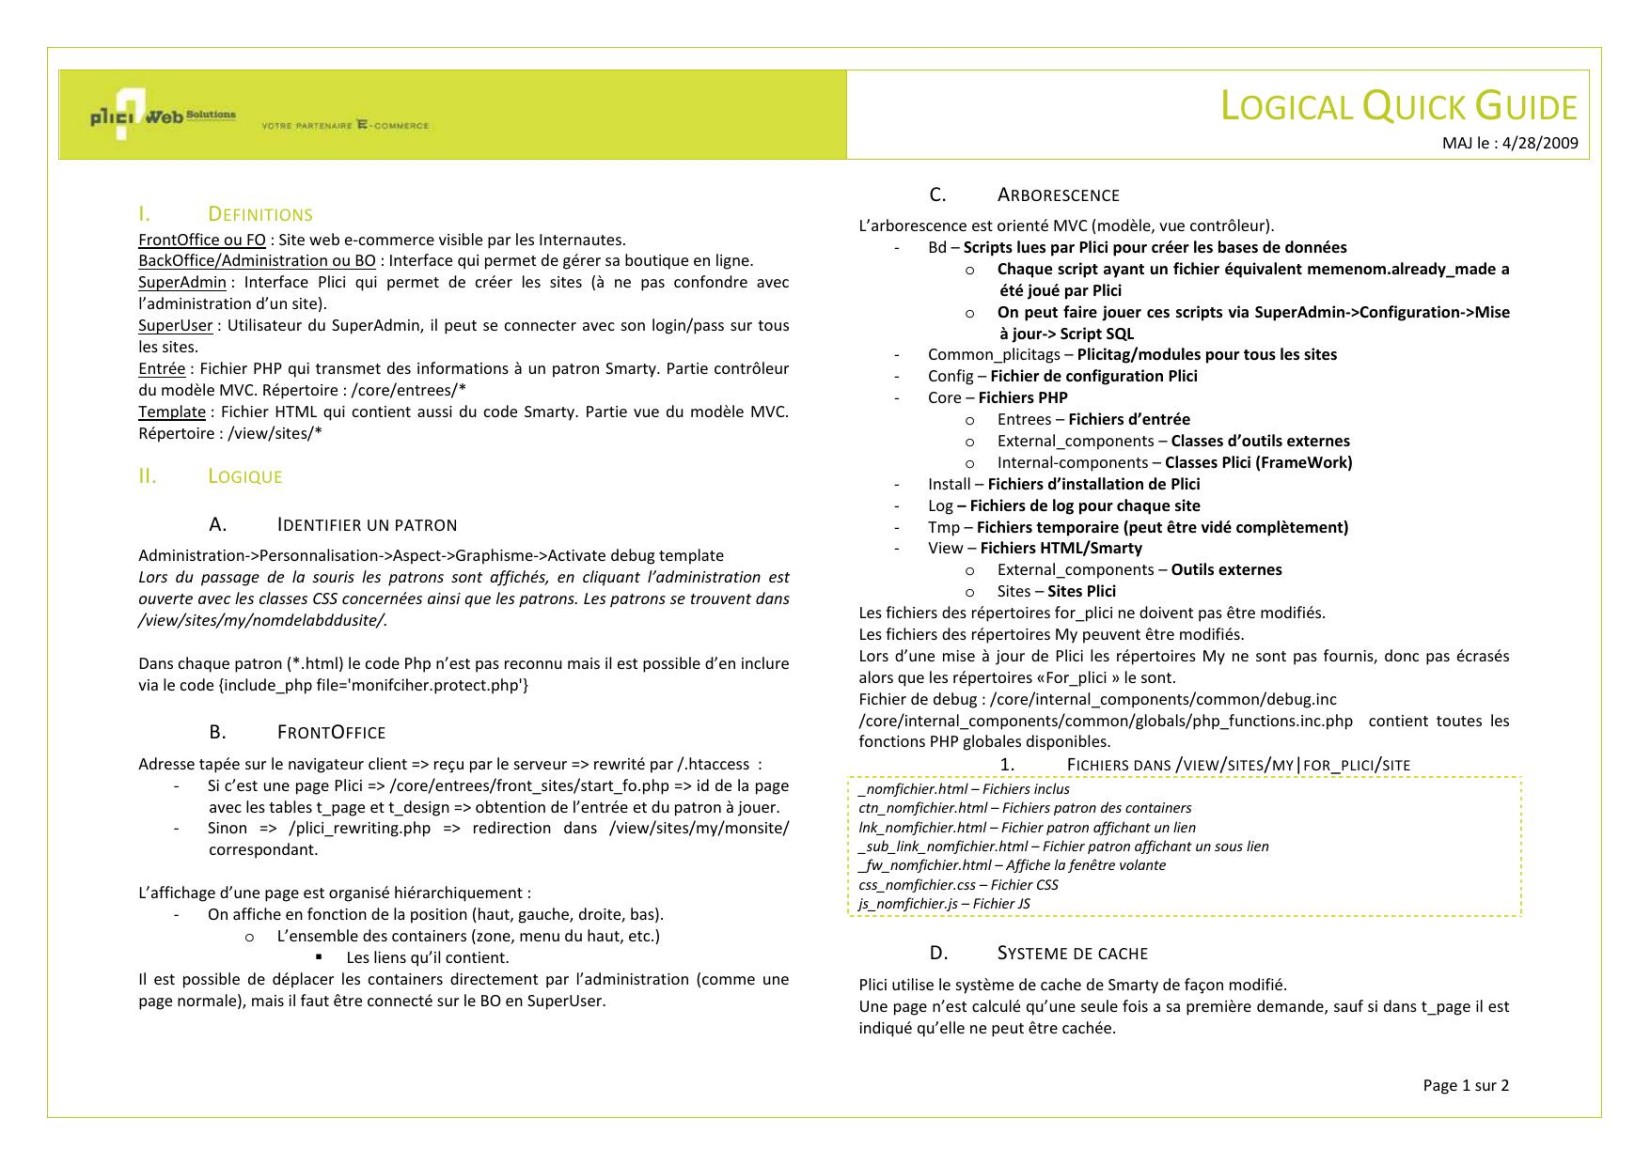 20090428105303_plici_logical_quick_guide